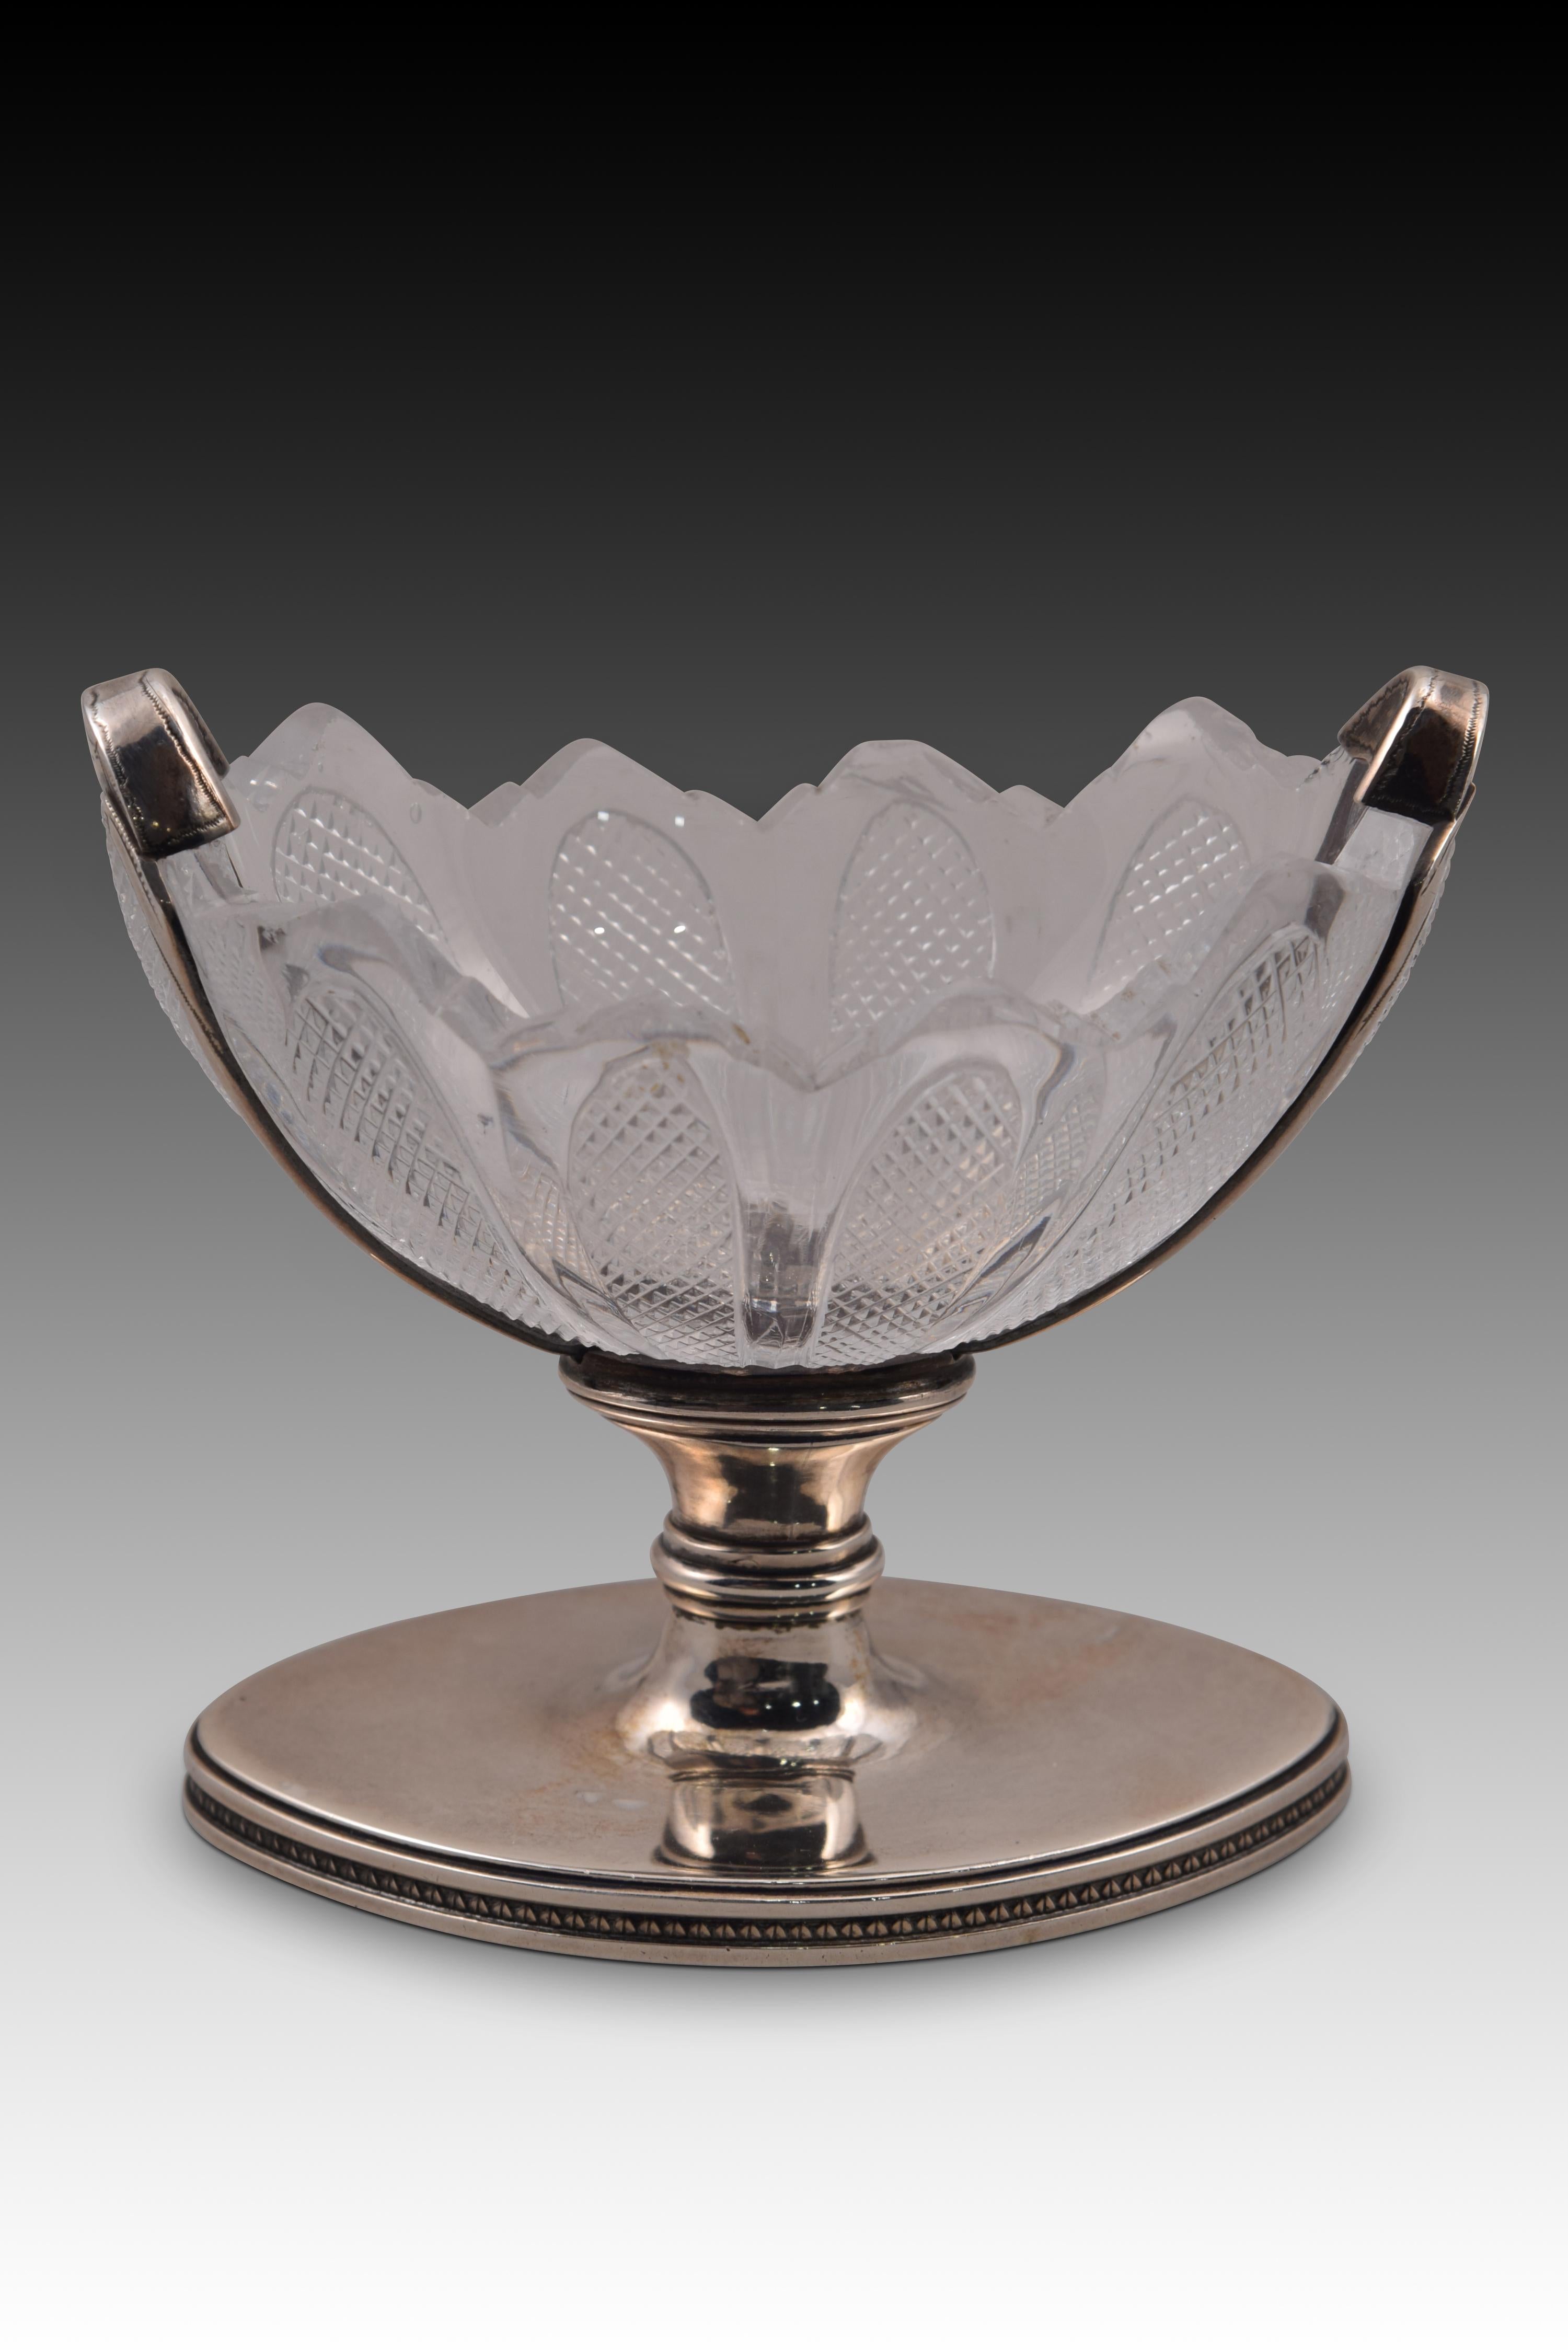 European Silver and Glass Spice Dish or Bowl, 19th Century For Sale